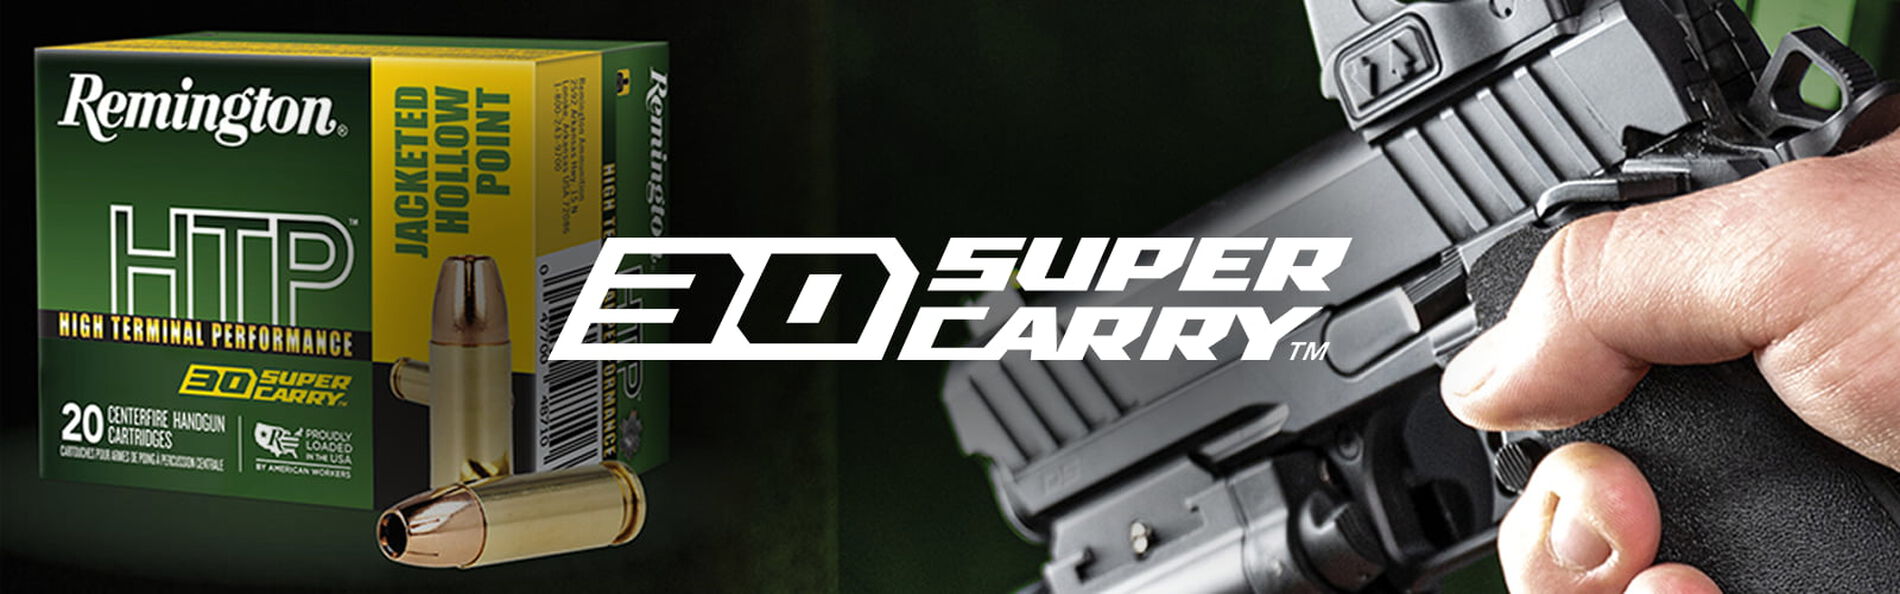 30 Super Carry Packaging and cartridges and a person holding a handgun with the 30 Super Carry logo